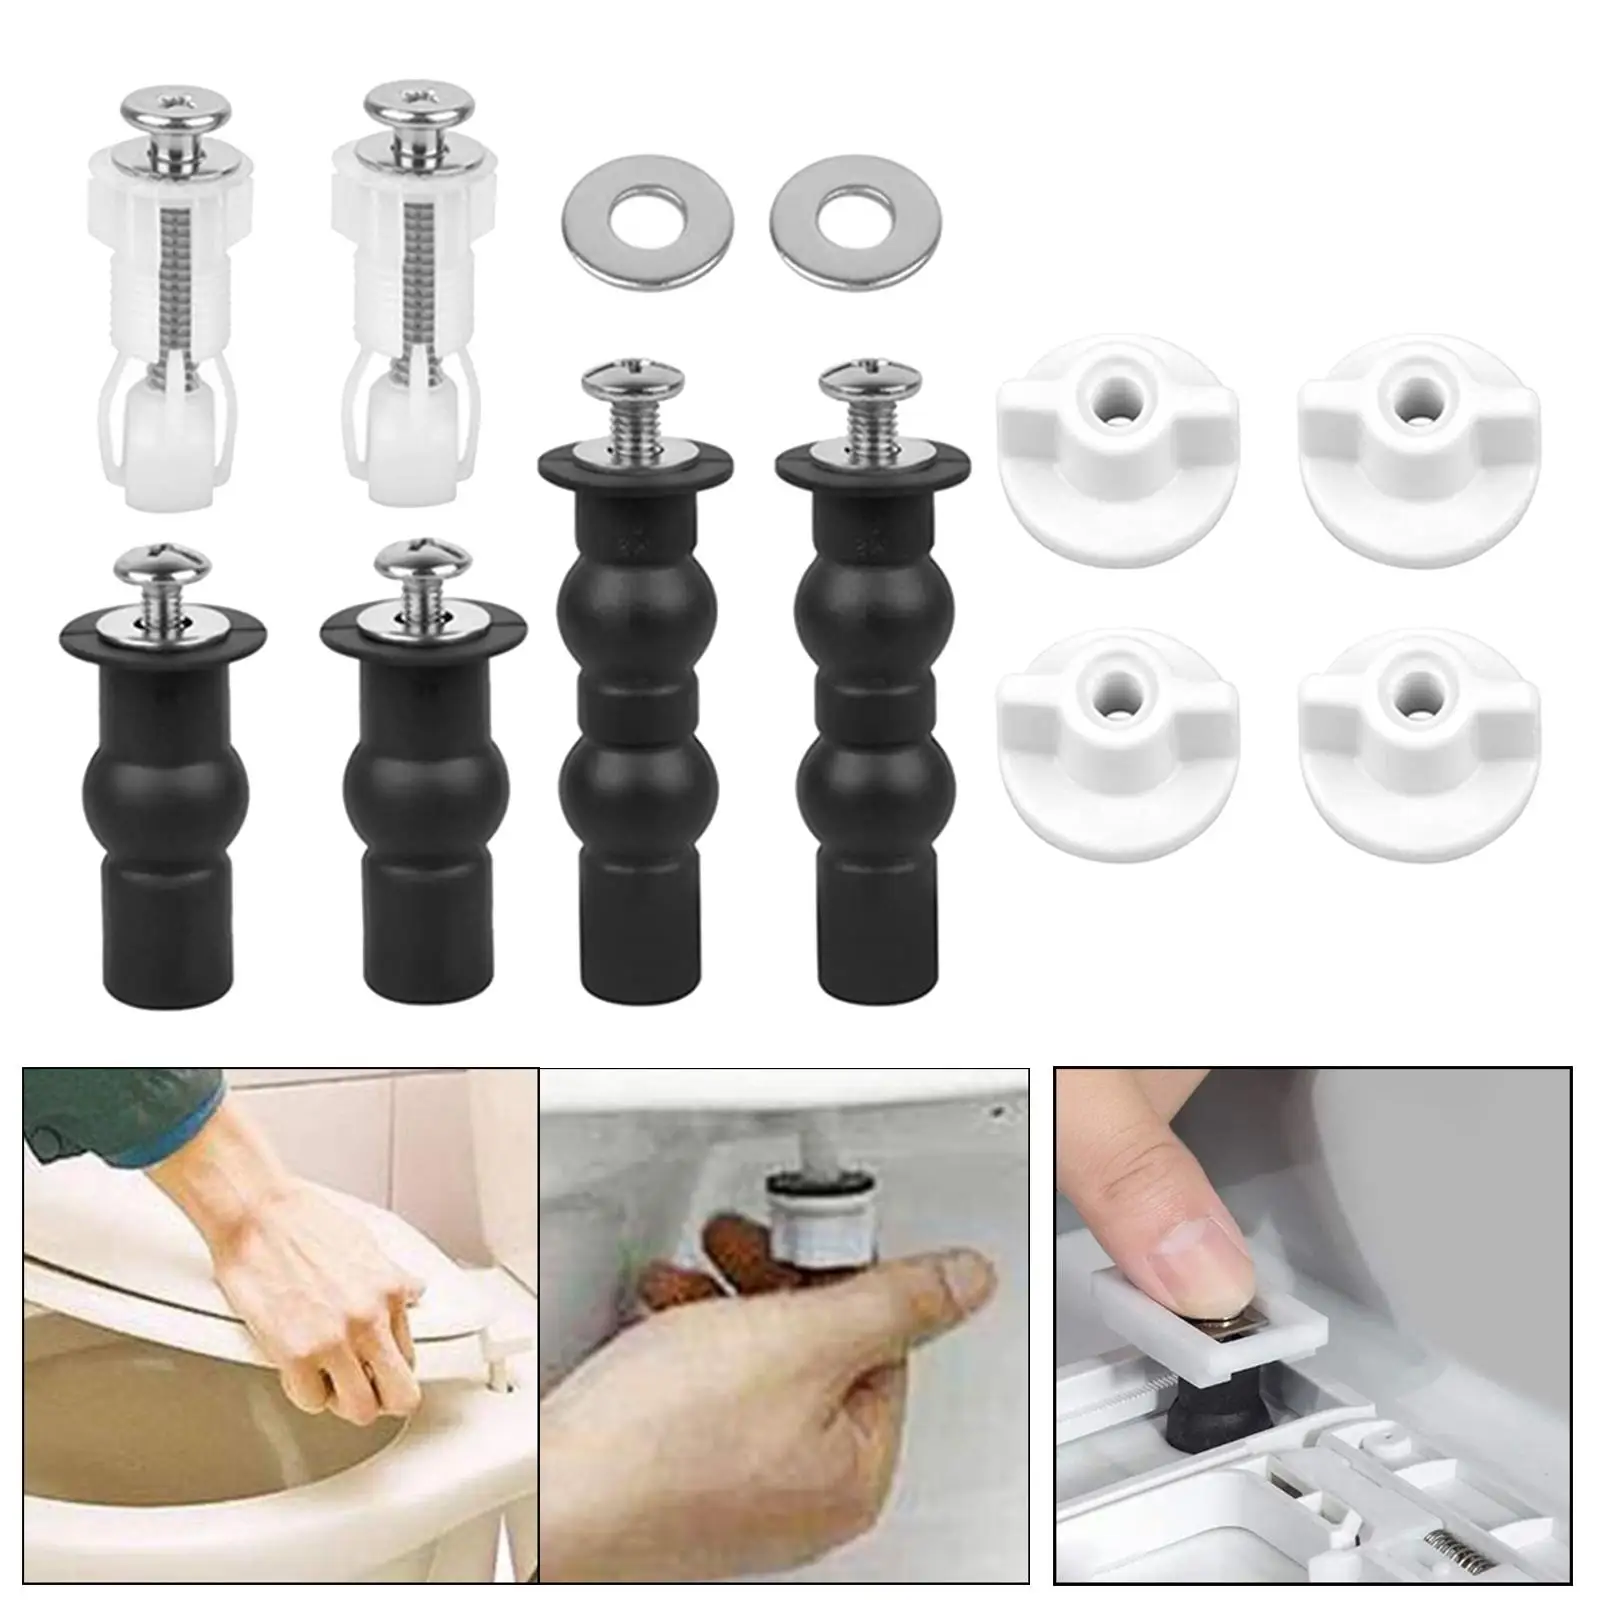 Universal Screw Toilet Toilet Seat Screws Toilet Cover Accessories Rubber Spreader Bolts Expansion Screws Replacement